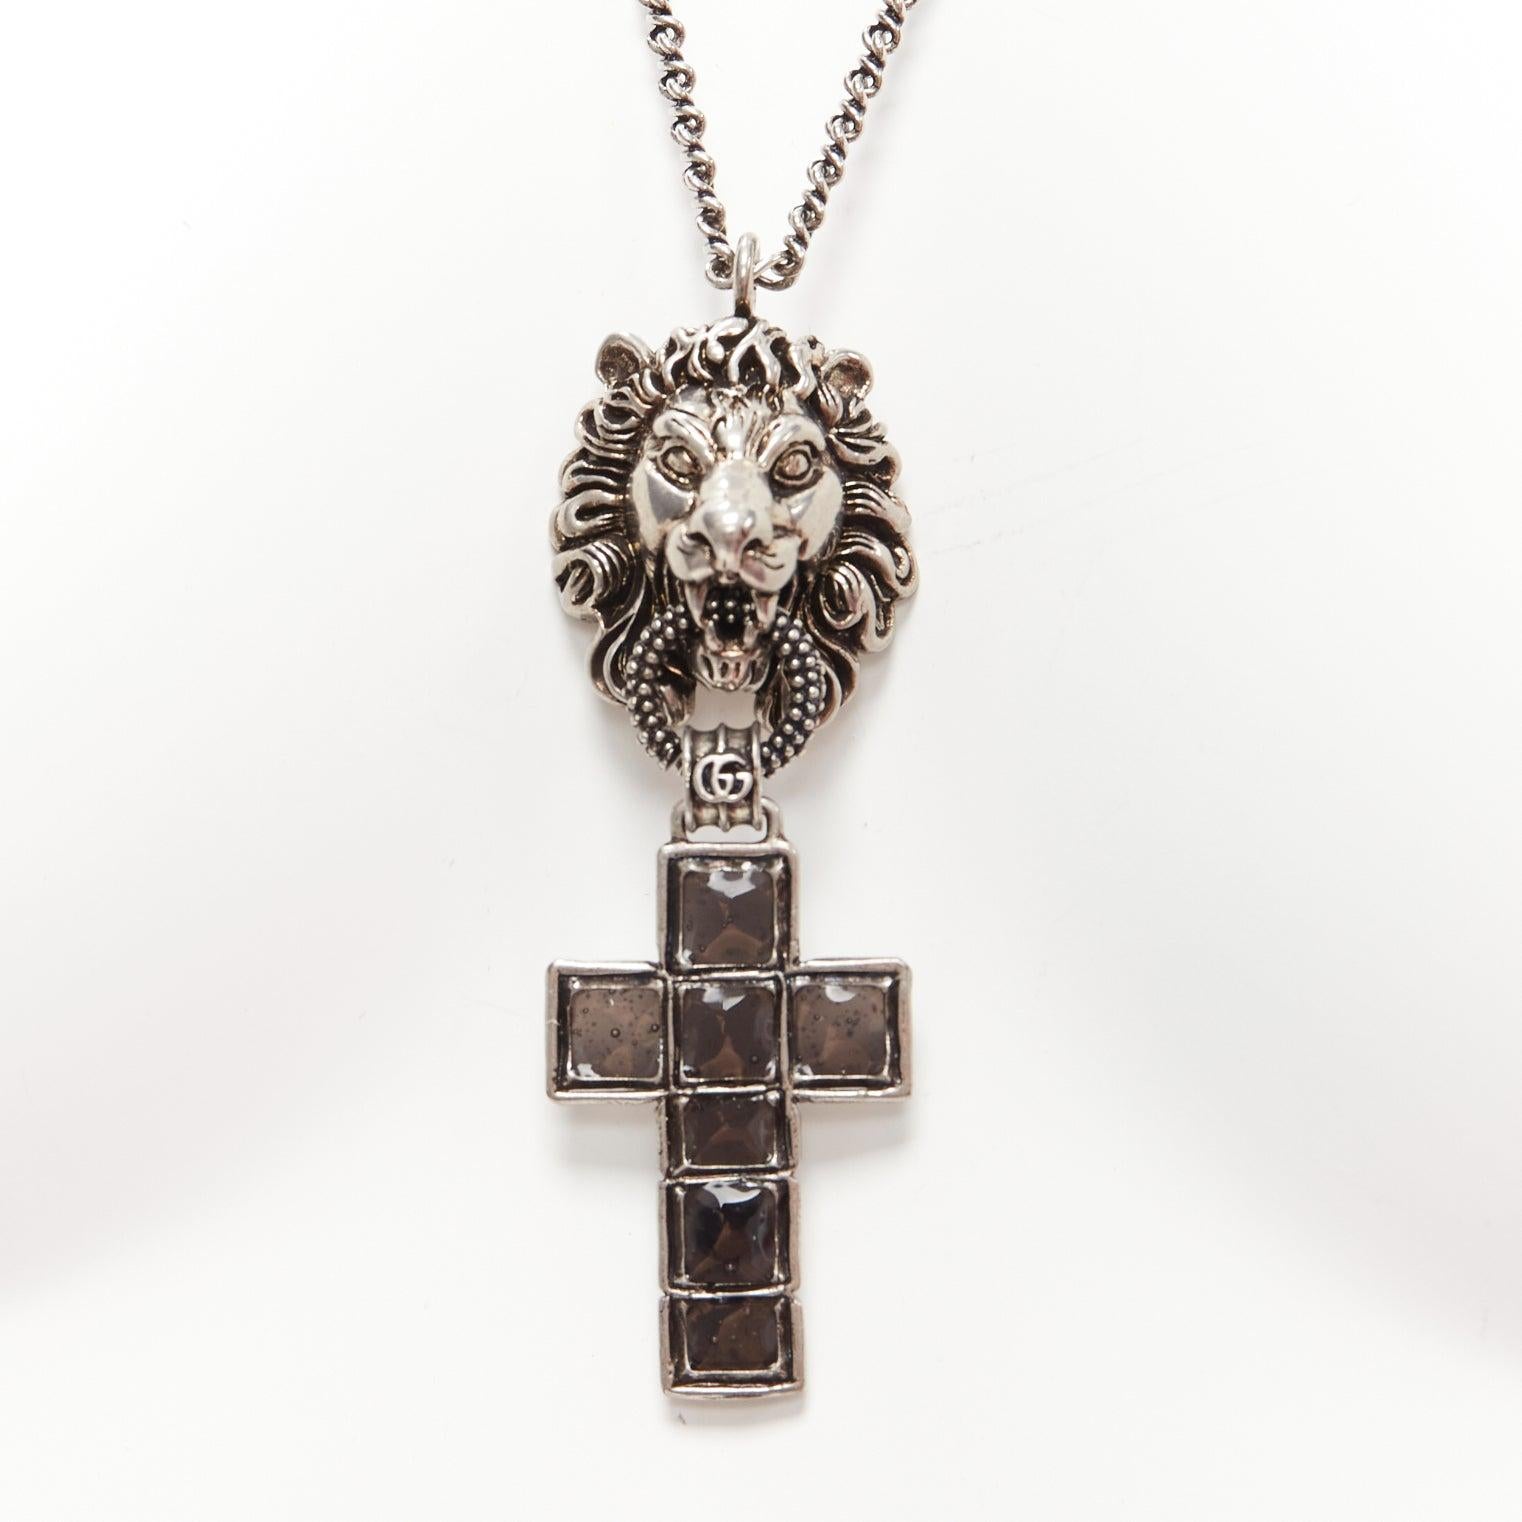 GUCCI Alessandro Michele Lion head Byzantine cross long necklace
Reference: TGAS/D00848
Brand: Gucci
Designer: Alessandro Michele
Material: Metal
Color: Black, Silver
Pattern: Animal Print
Closure: Lobster Clasp
Lining: Silver Metal
Extra Details: